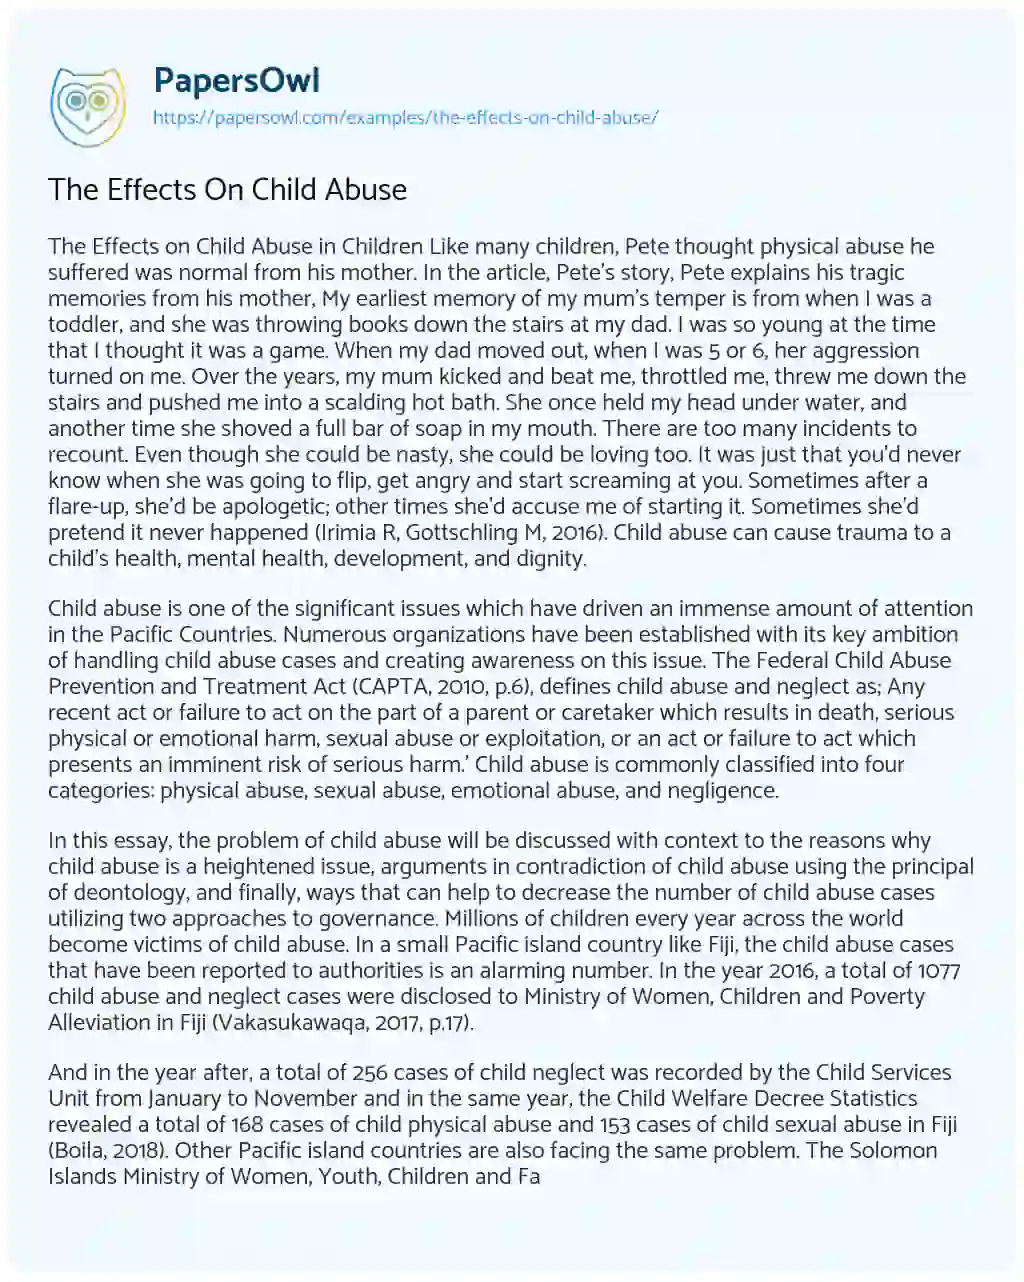 Essay on The Effects on Child Abuse